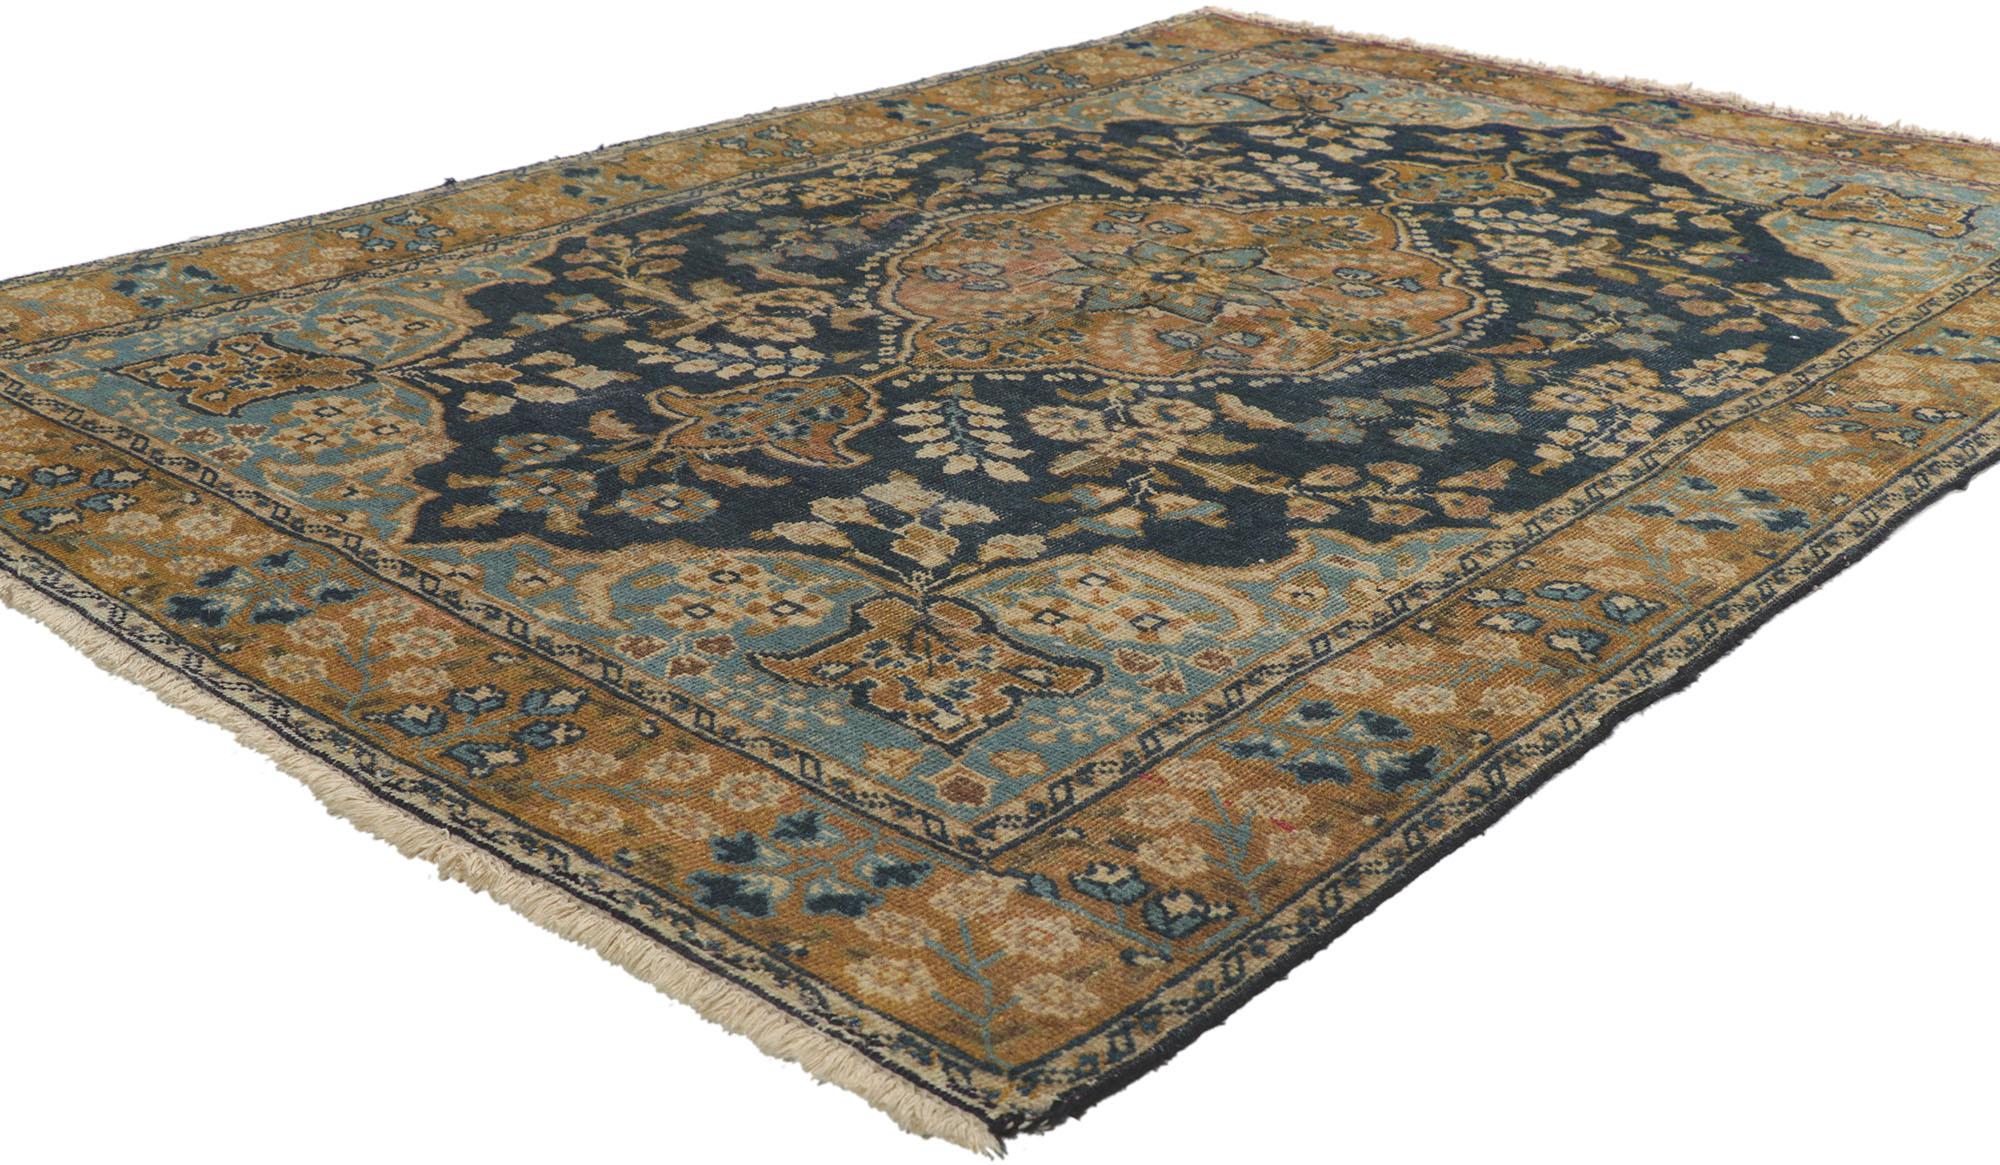 78240 Antique Persian Tabriz Rug, 04'03 x 06'00. Rendered in variegated shades of brown, blue, camel, sky blue, tan, navy blue, taupe, cerulean, ecru, and beige with other accent colors. Desirable Age Wear. Abrash. Hand-knotted wool. Made in Iran.